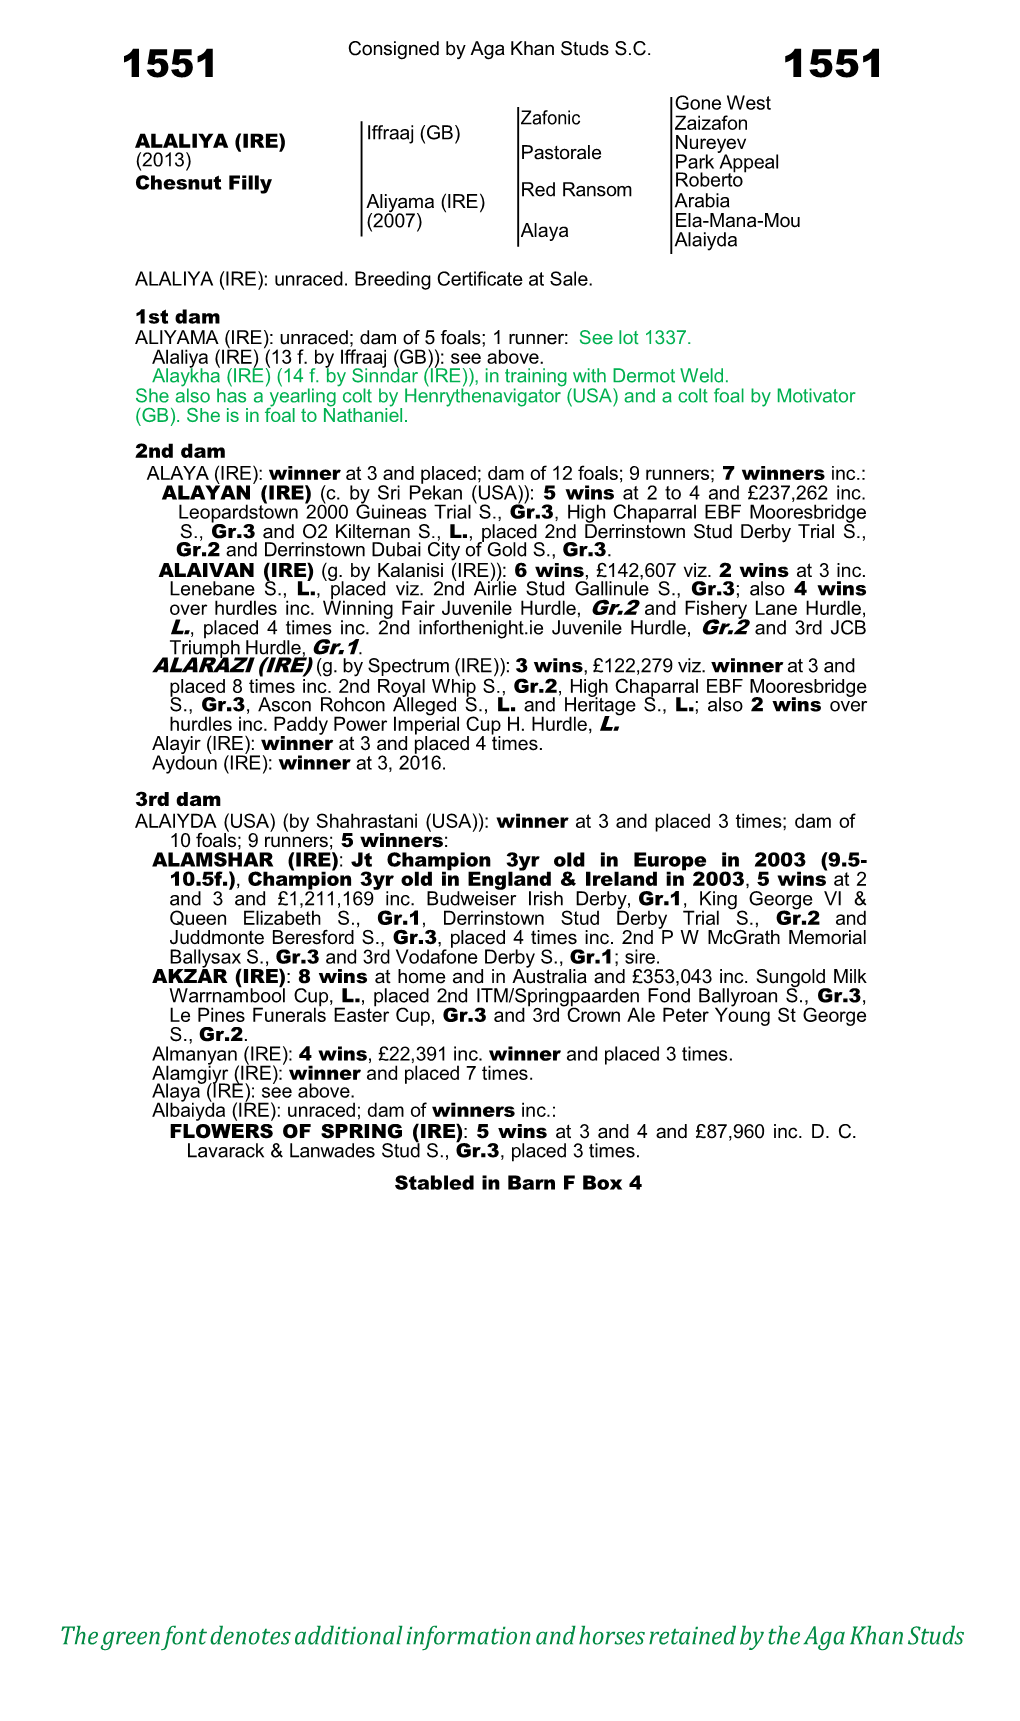 The Green Font Denotes Additional Information and Horses Retained by the Aga Khan Studs